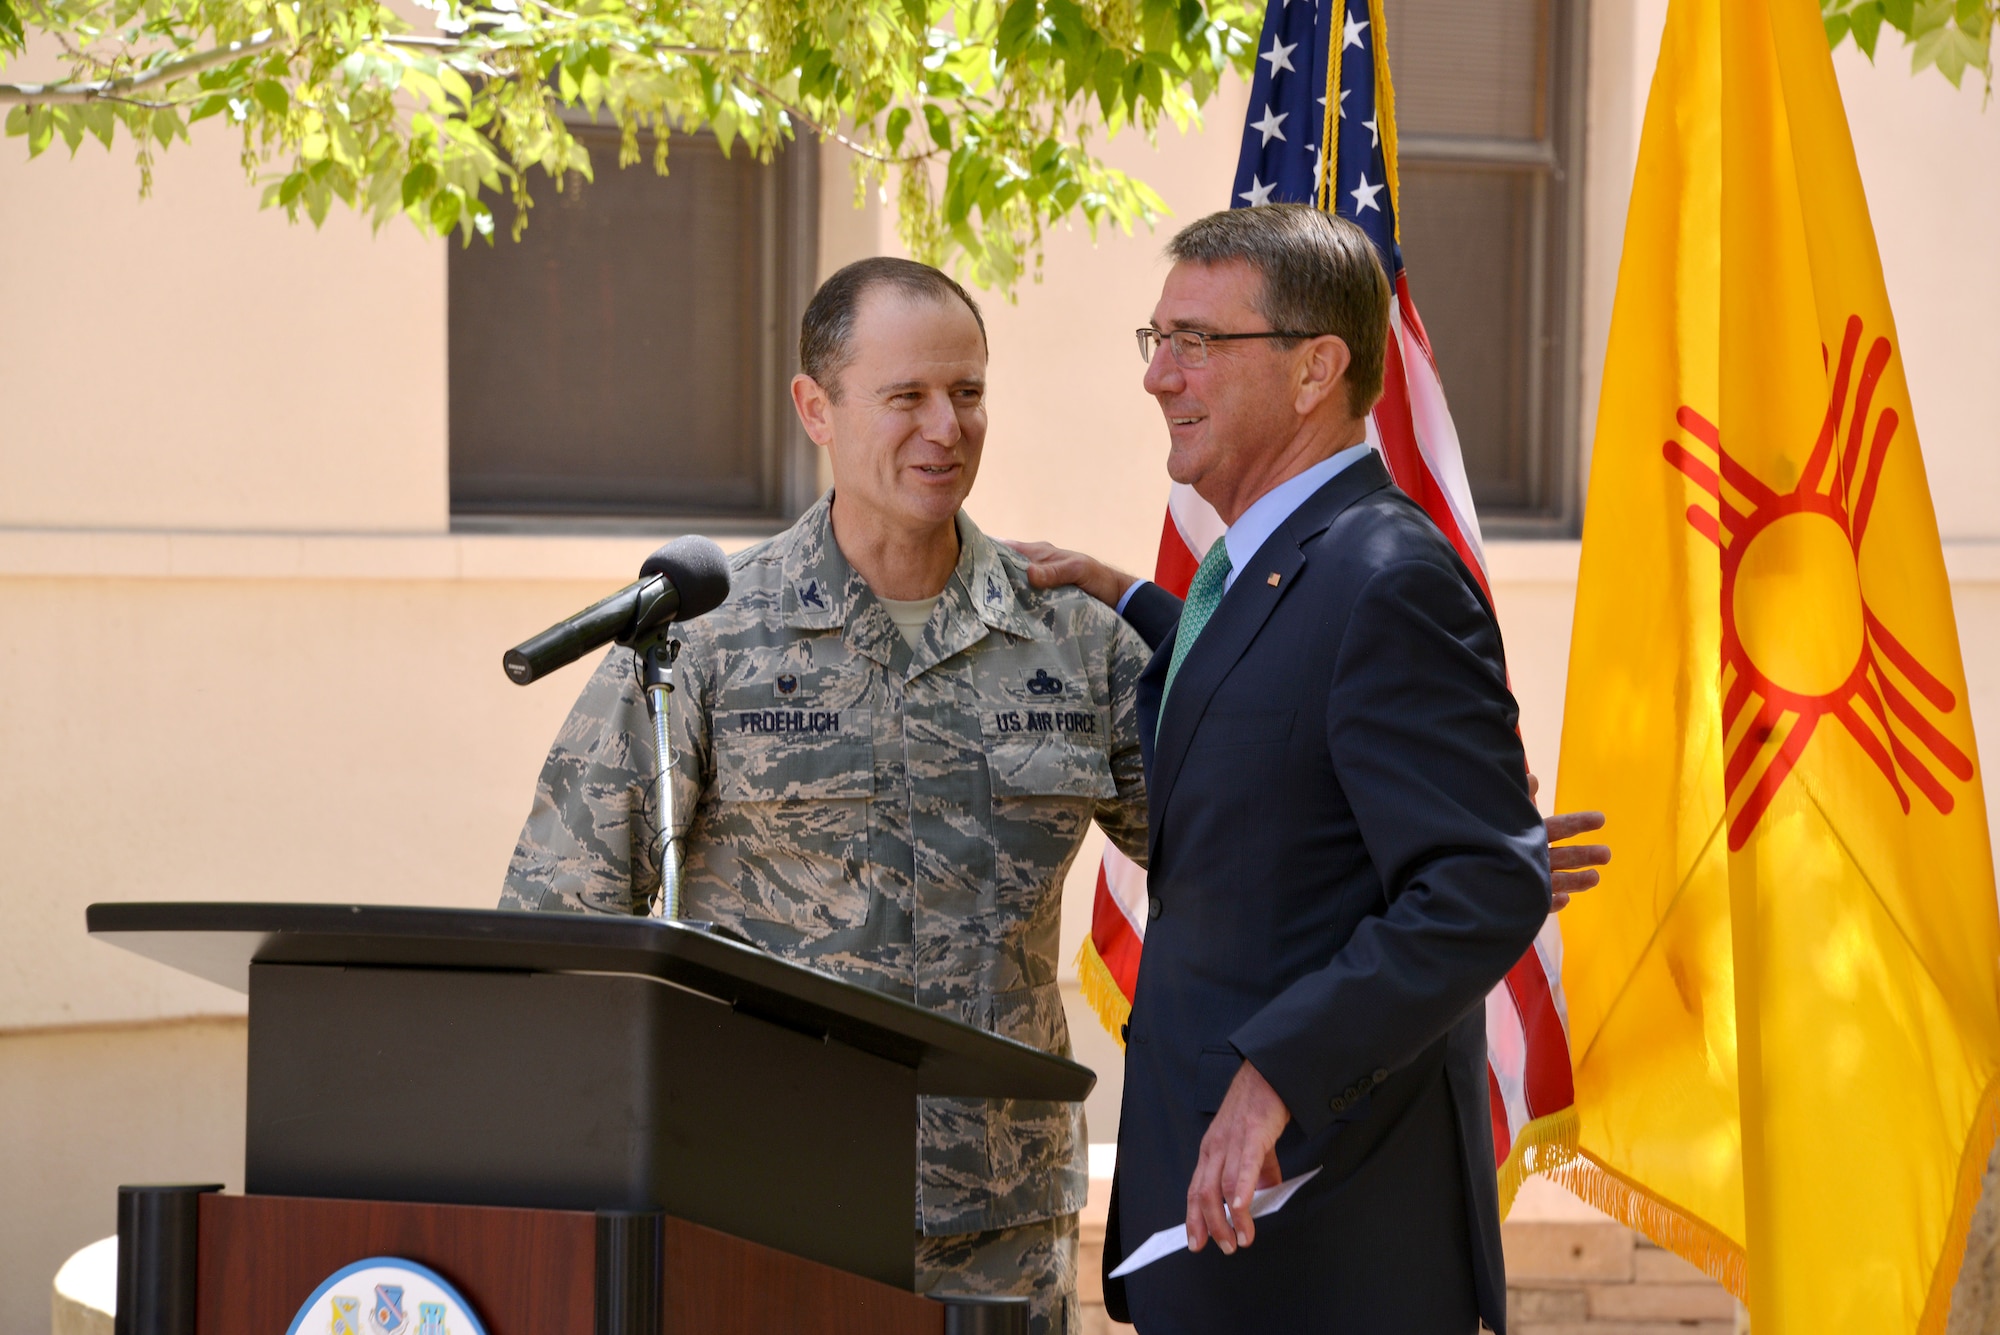 Col. Eric Froehlich, 377th Air Base Wing commander, greets U.S. Secretary of Defense Ash Carter during a visit to Kirtland Sept. 27.  Carter spoke to Airmen, emphasizing the importance of the nuclear enterprise and thanked the Airmen for their work in helping build a strong nuclear deterrent. 